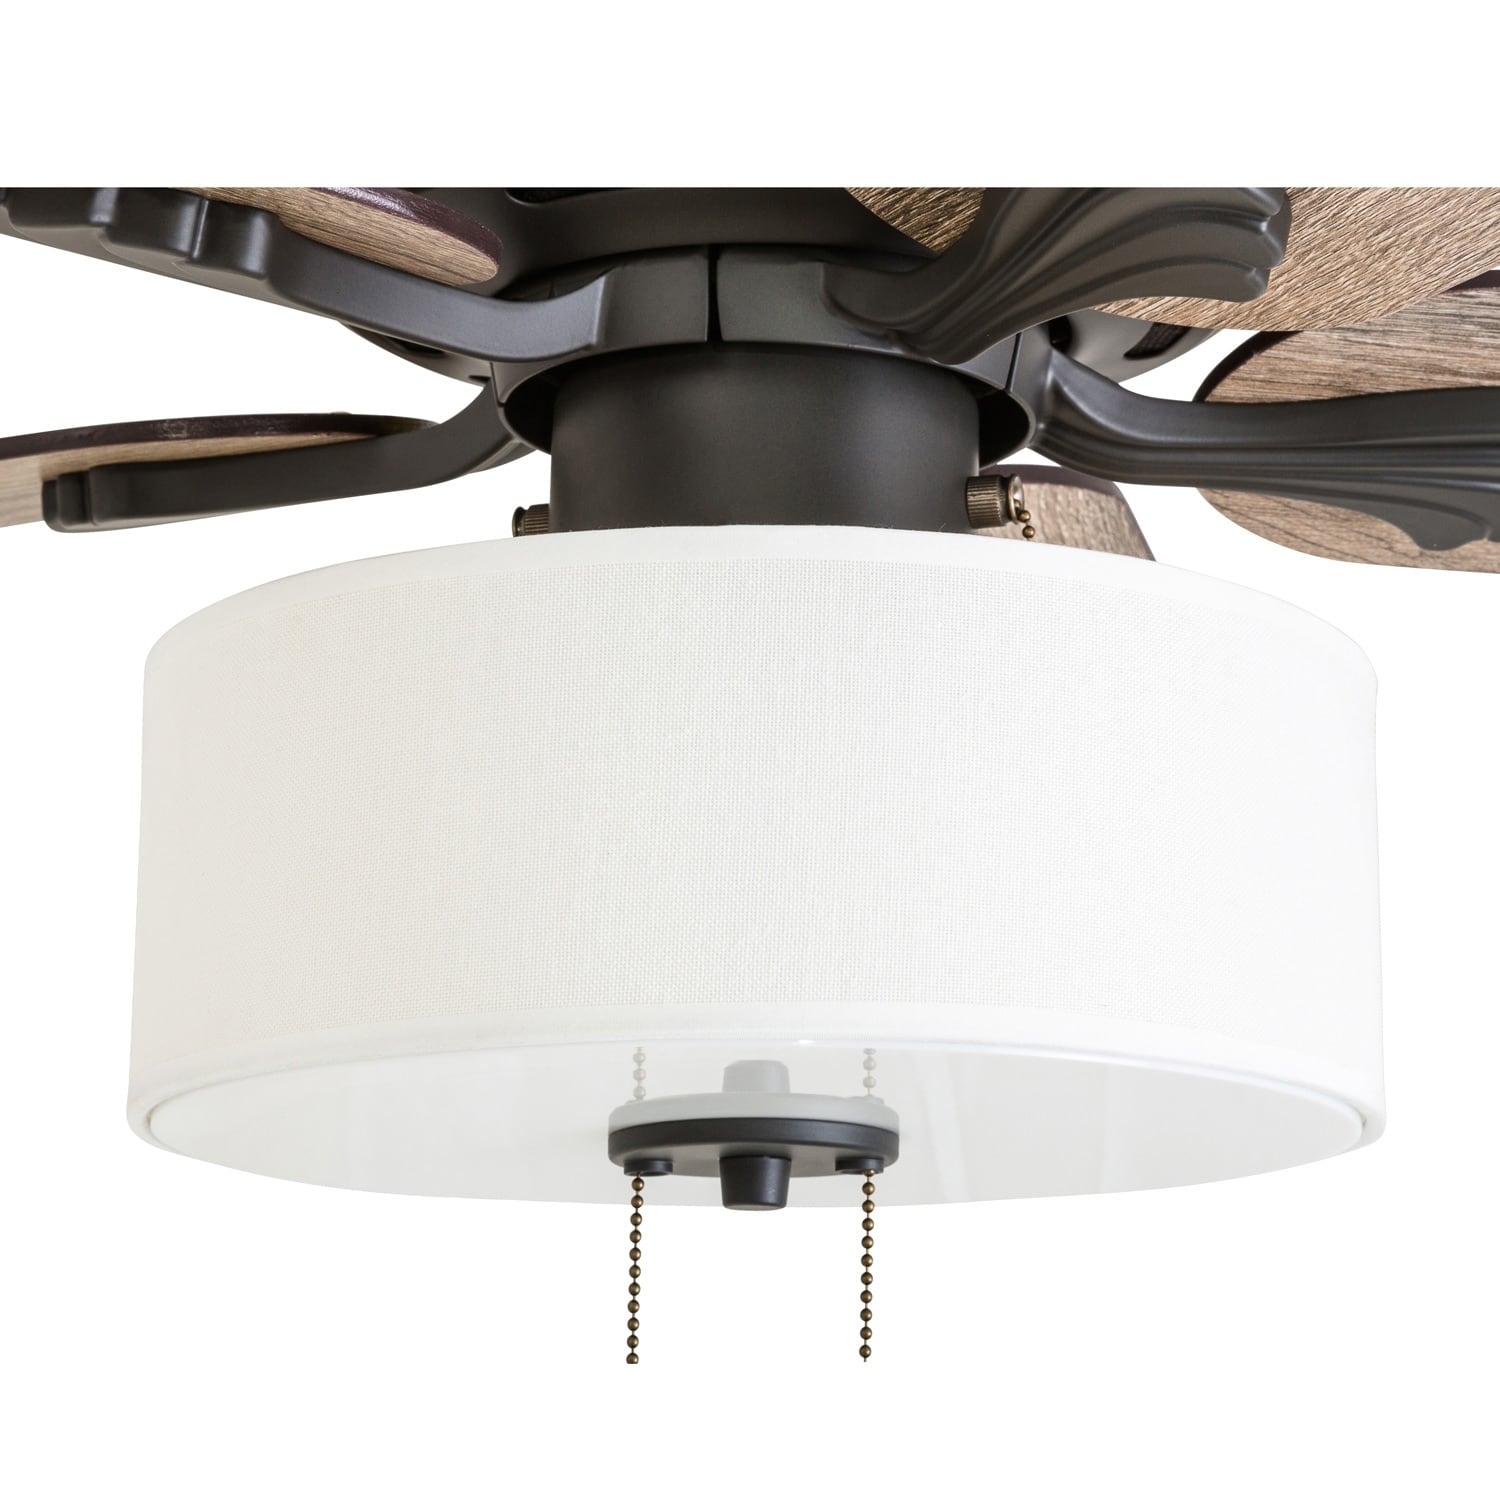 Shop Prominence Home Snowden Farmhouse 52 Aged Bronze Led Ceiling